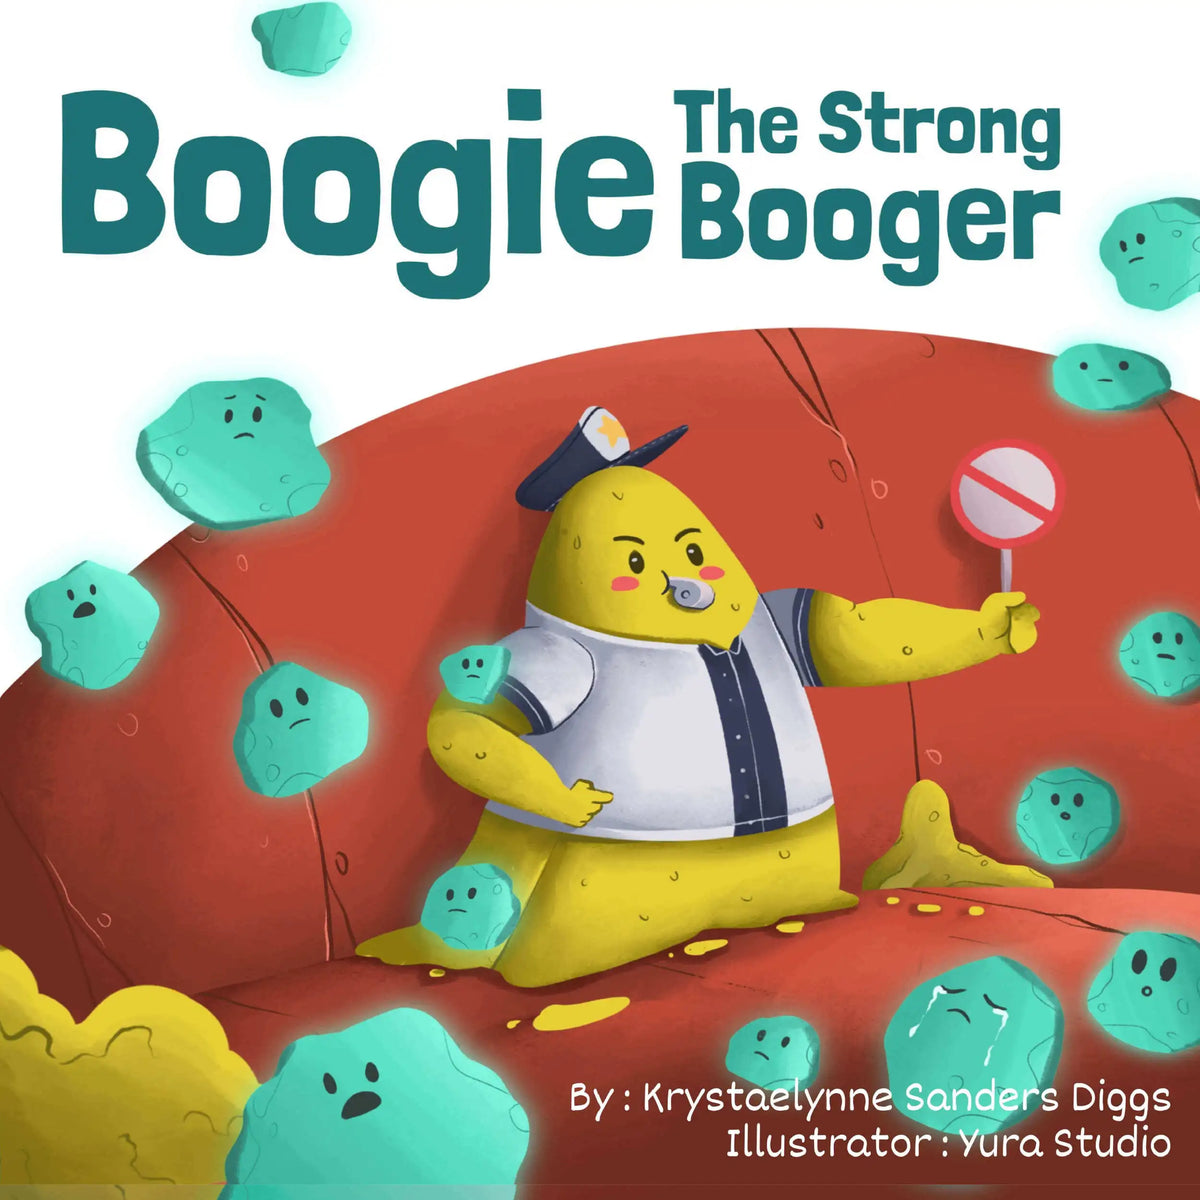 Boogie: The Strong Booger - Author Krystaelynne Sanders Diggs